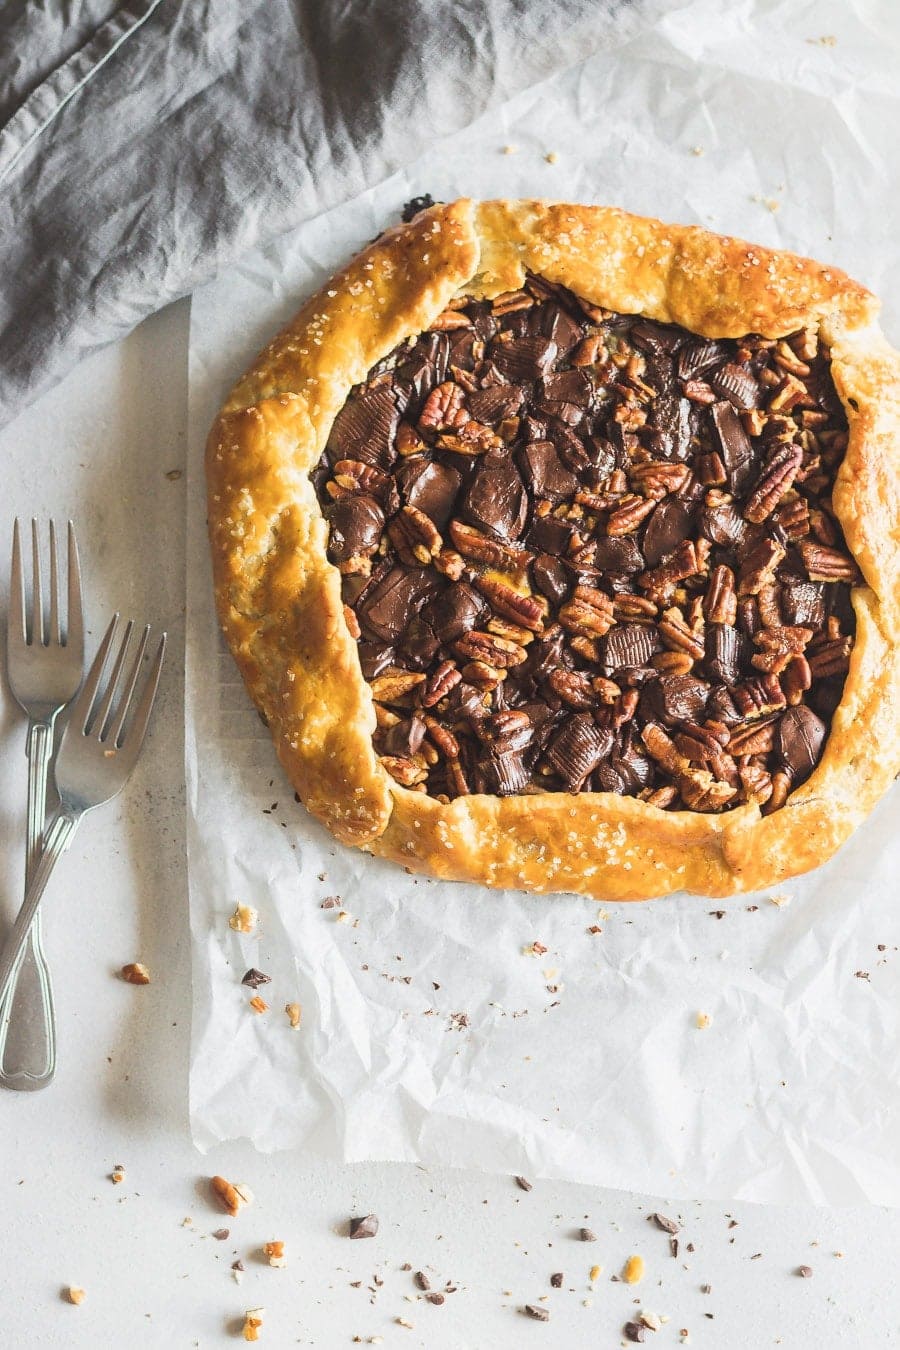 Everything you love about pecan pie but WAY easier. This flaky buttery pecan pie galette has dark chocolate, strong espresso, raw honey, and chopped pecans.